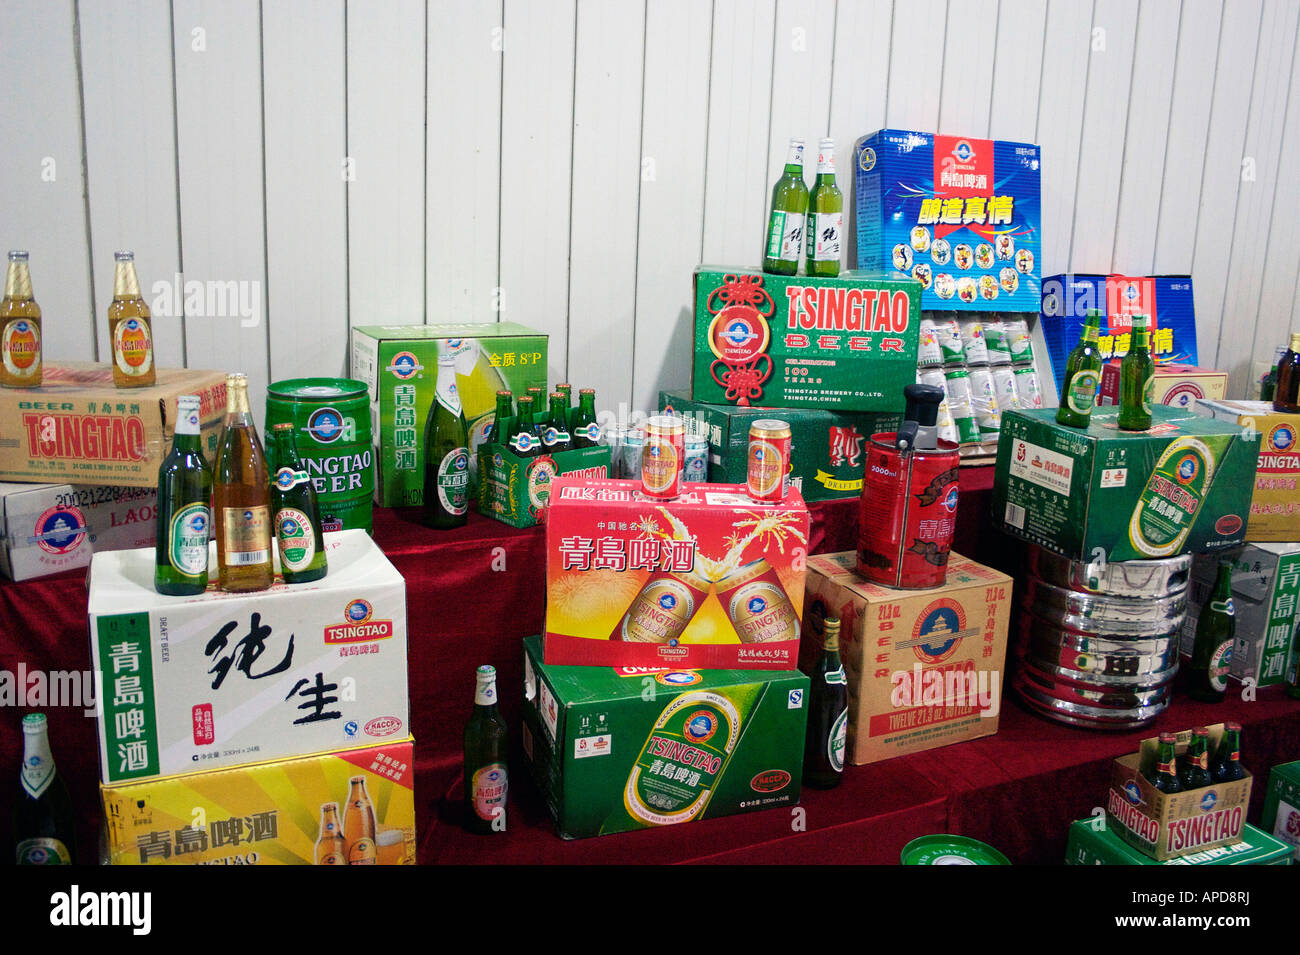 Tsingtao beer products on display in the brewery museum Qingdao Shandong China Stock Photo